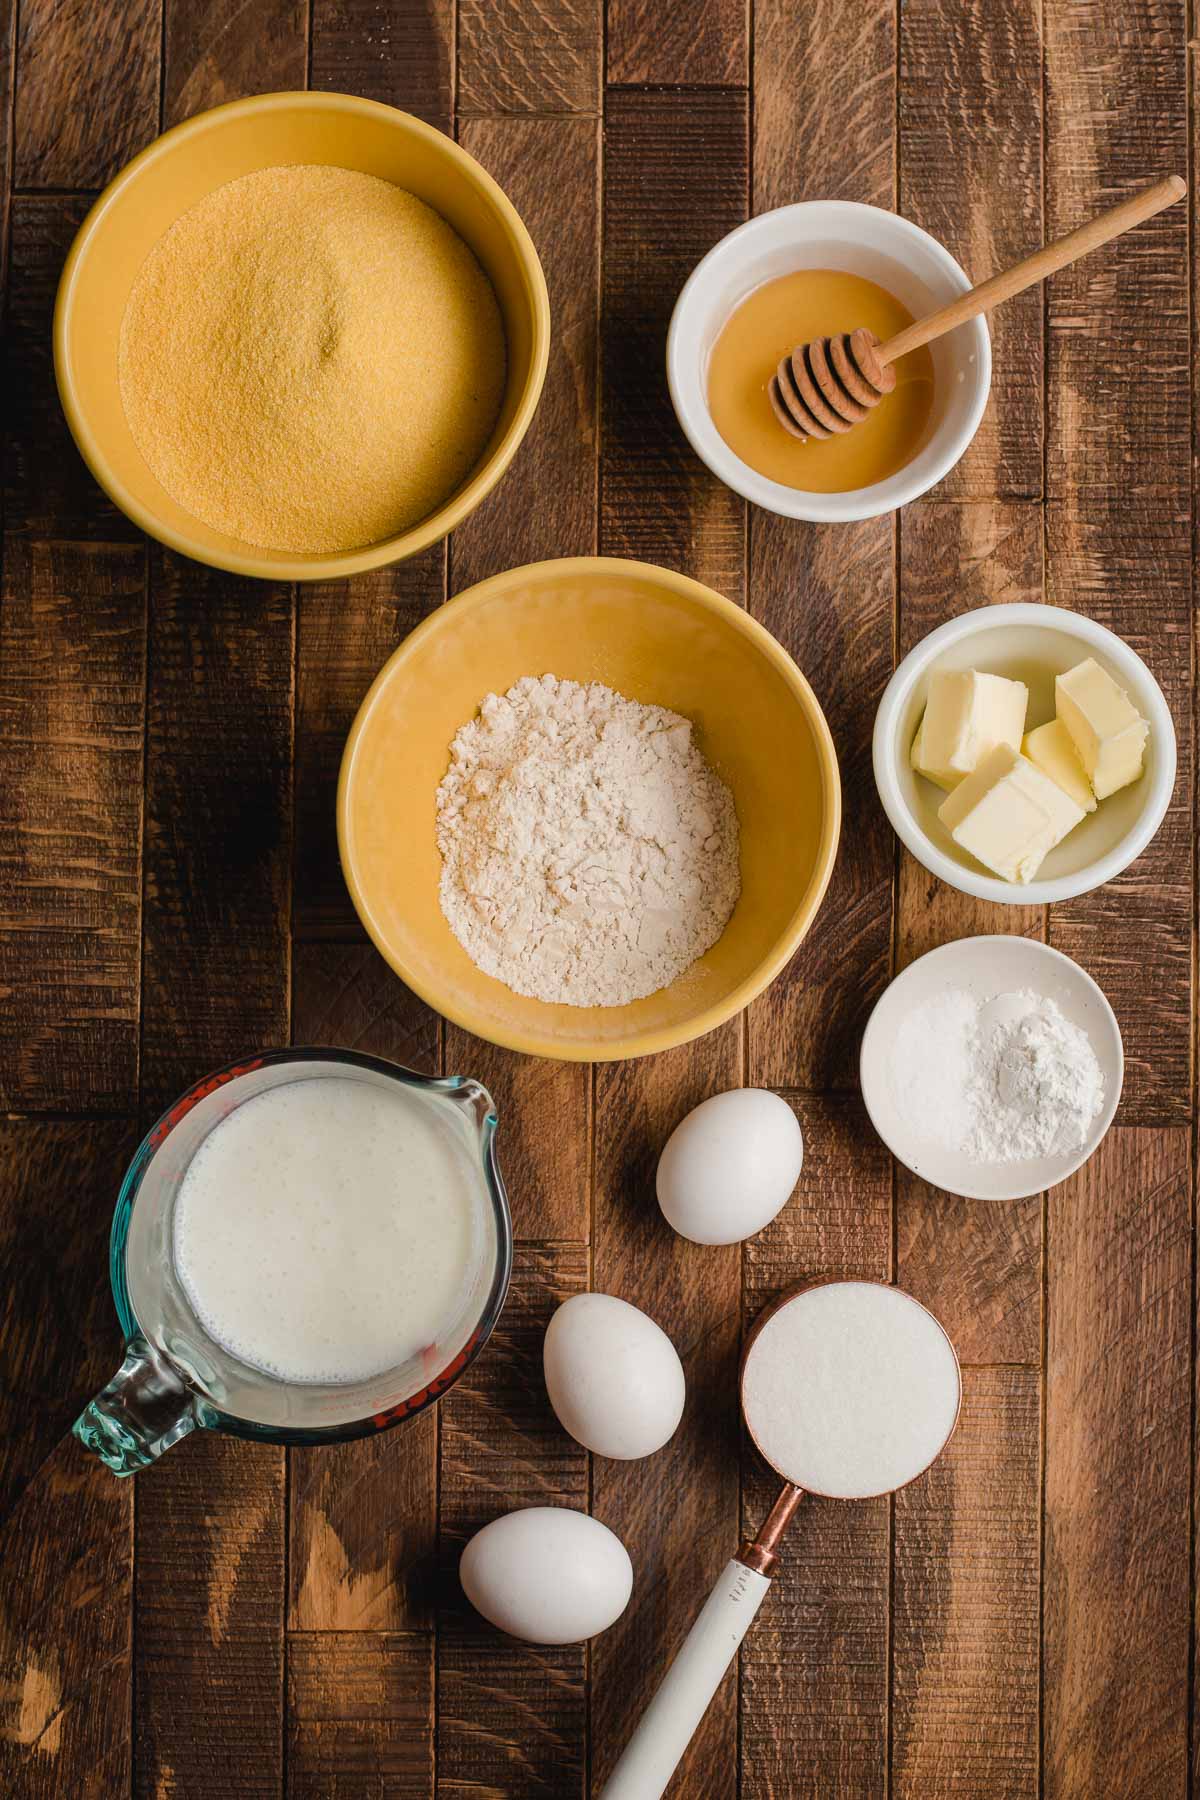 Ingredients on a wood surface--cornmeal, milk, eggs, sugar, butter, gluten free flour, honey, and baking soda.